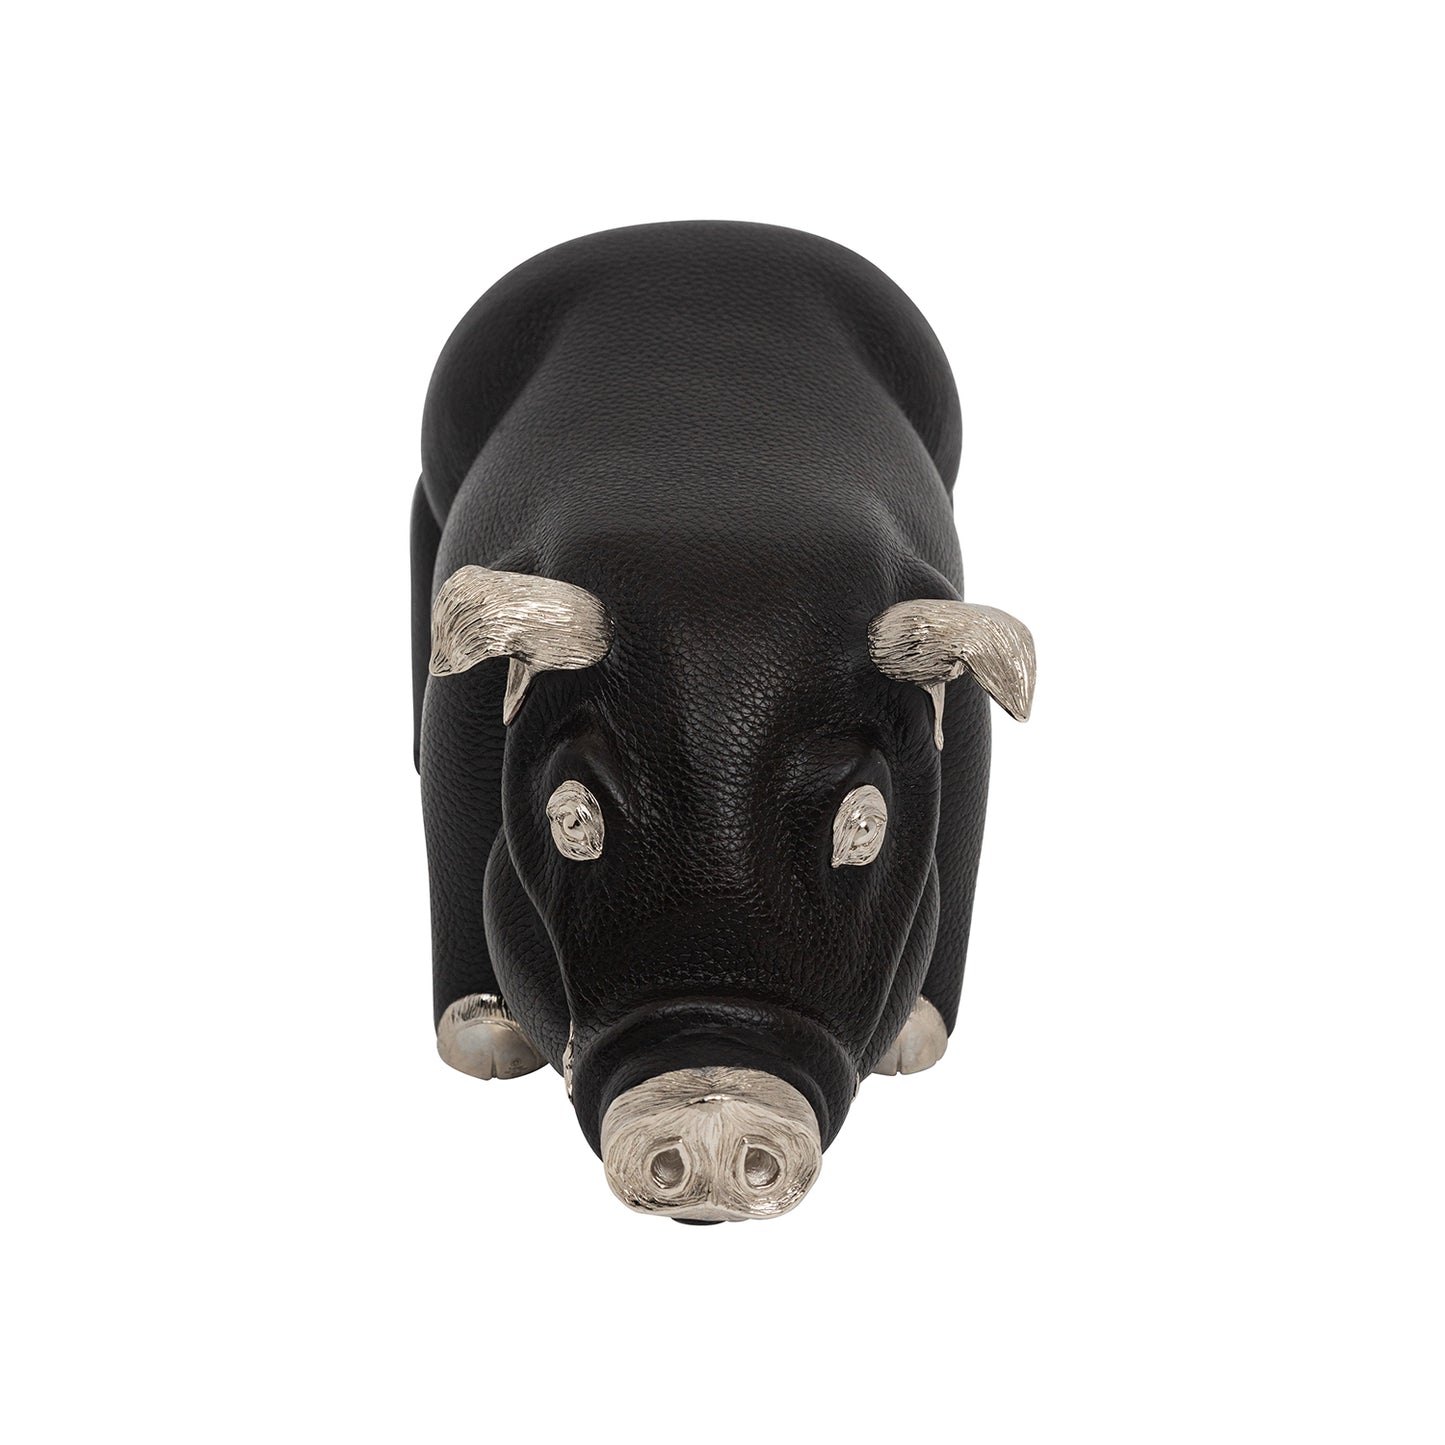 Brown Leather Pig Paperweight/Bookend